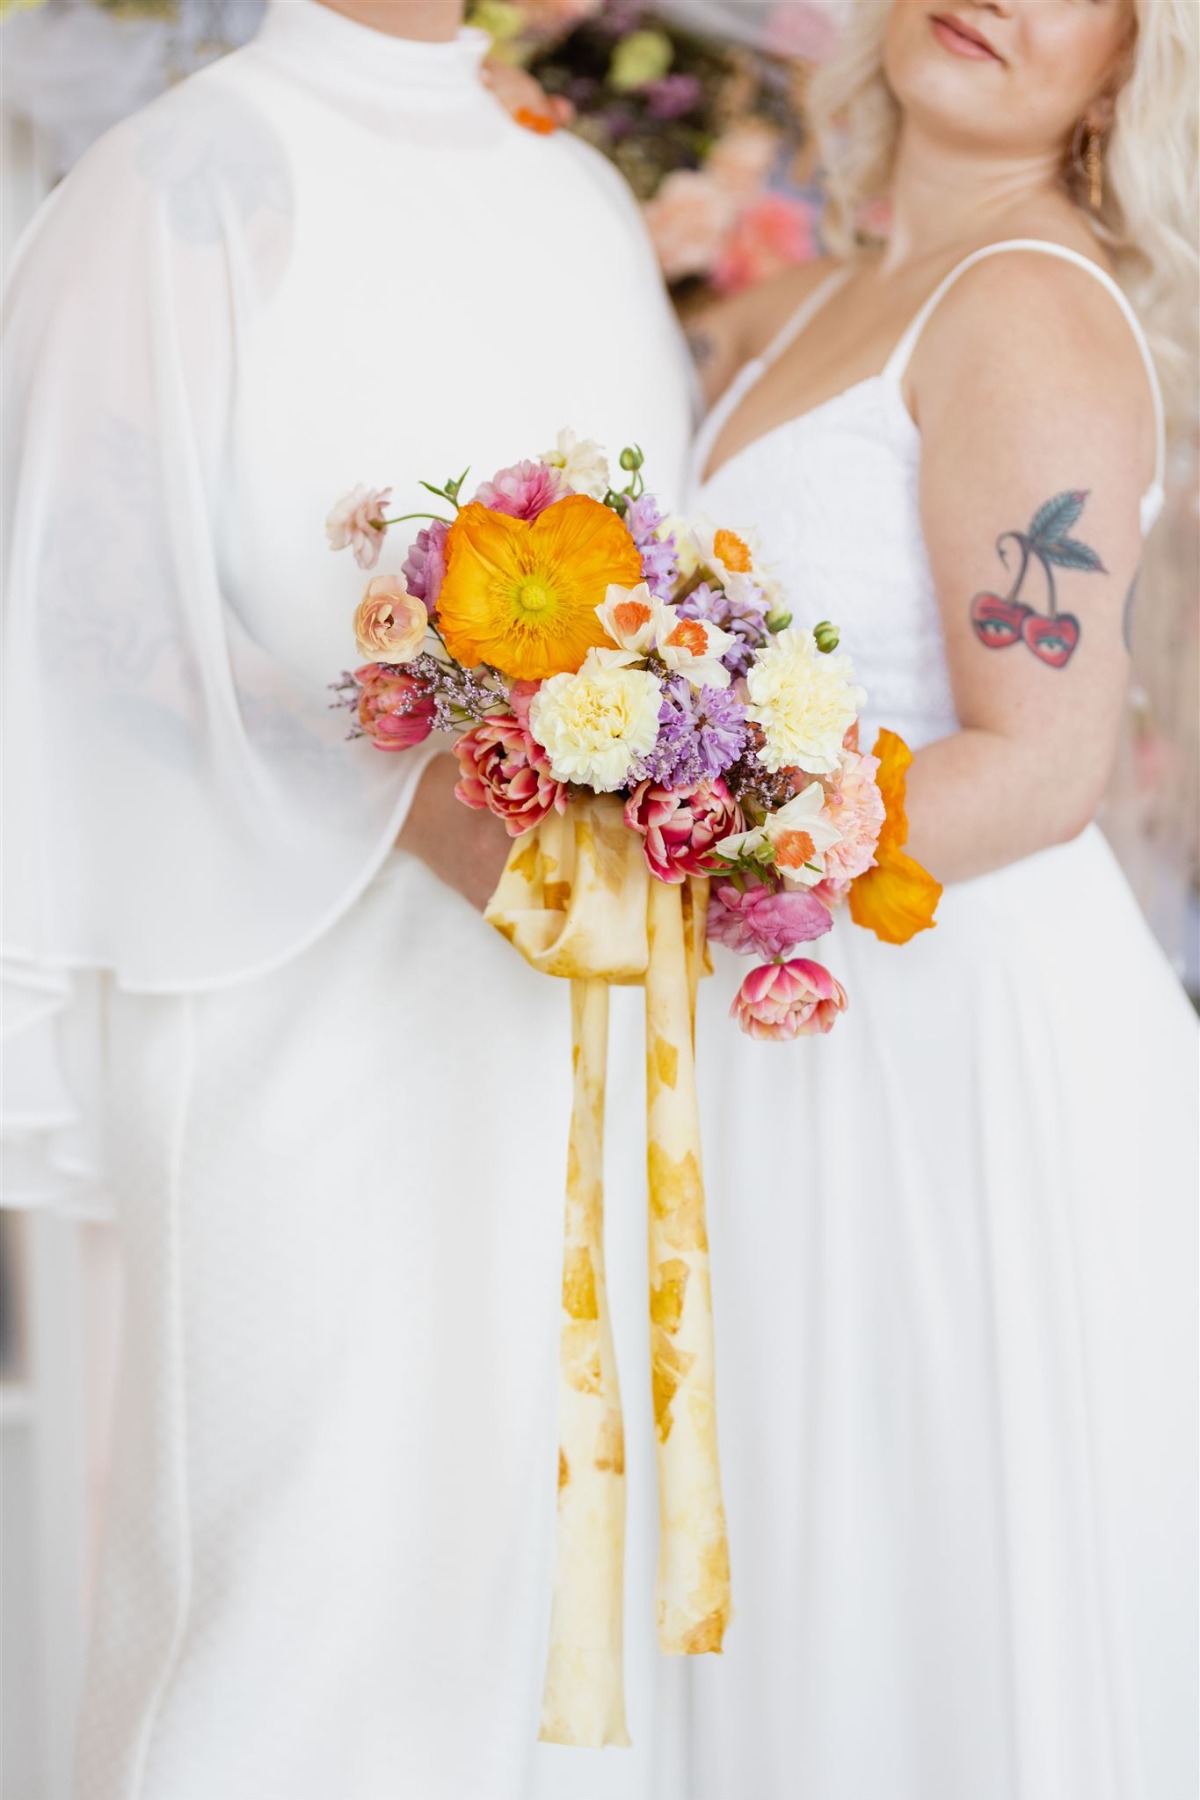 Queer couple holding bouquet